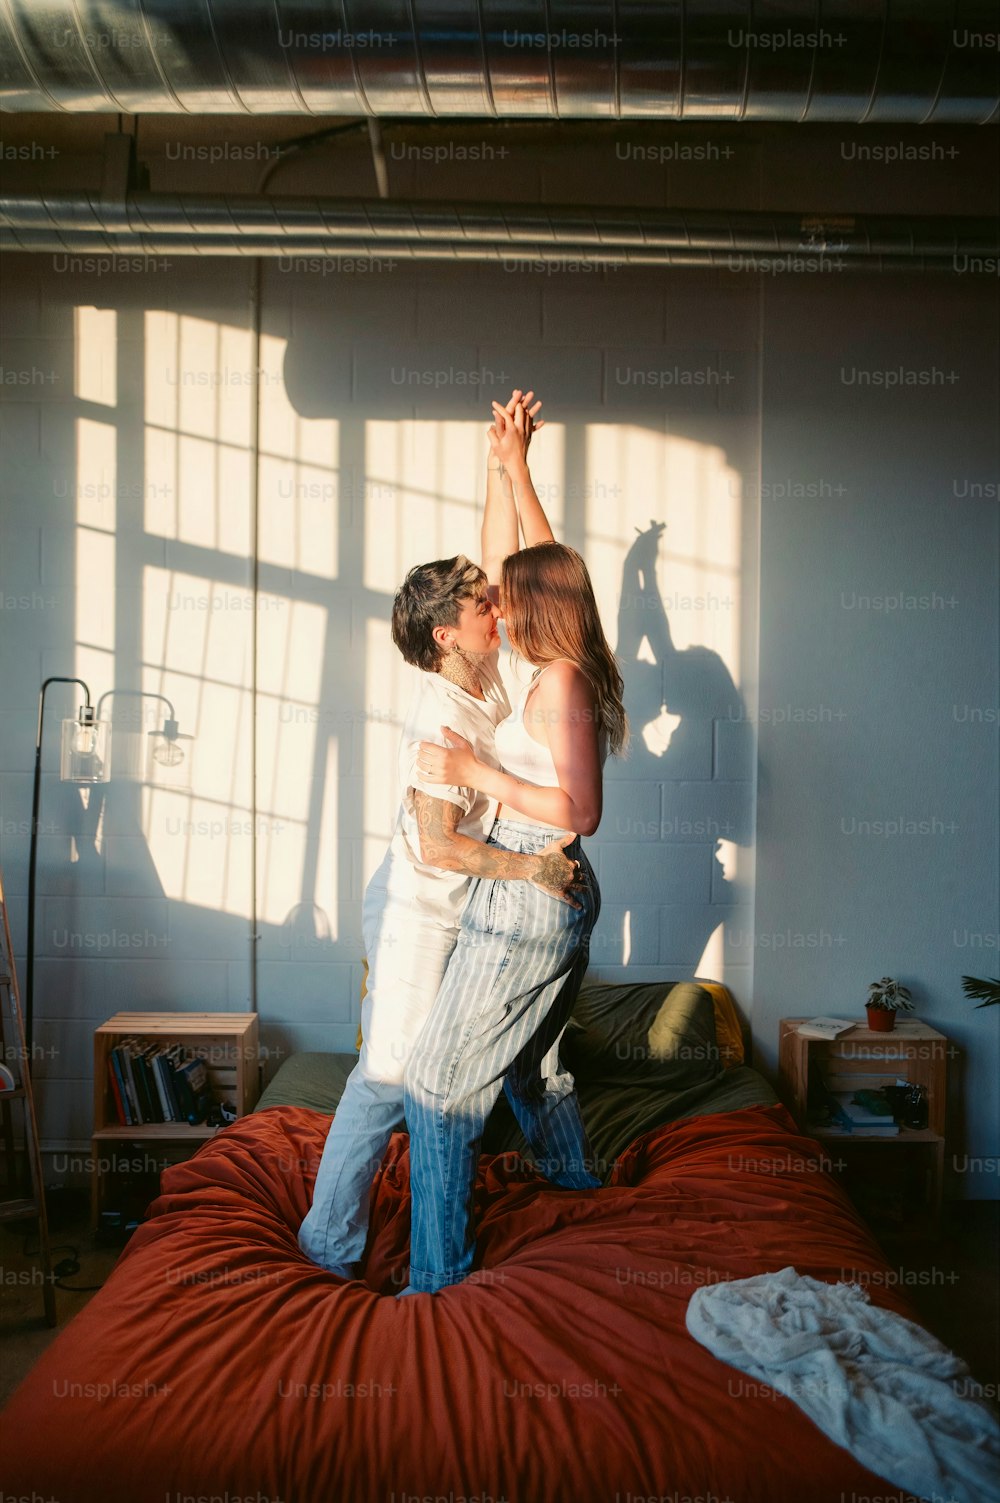 a man and woman standing on top of a bed